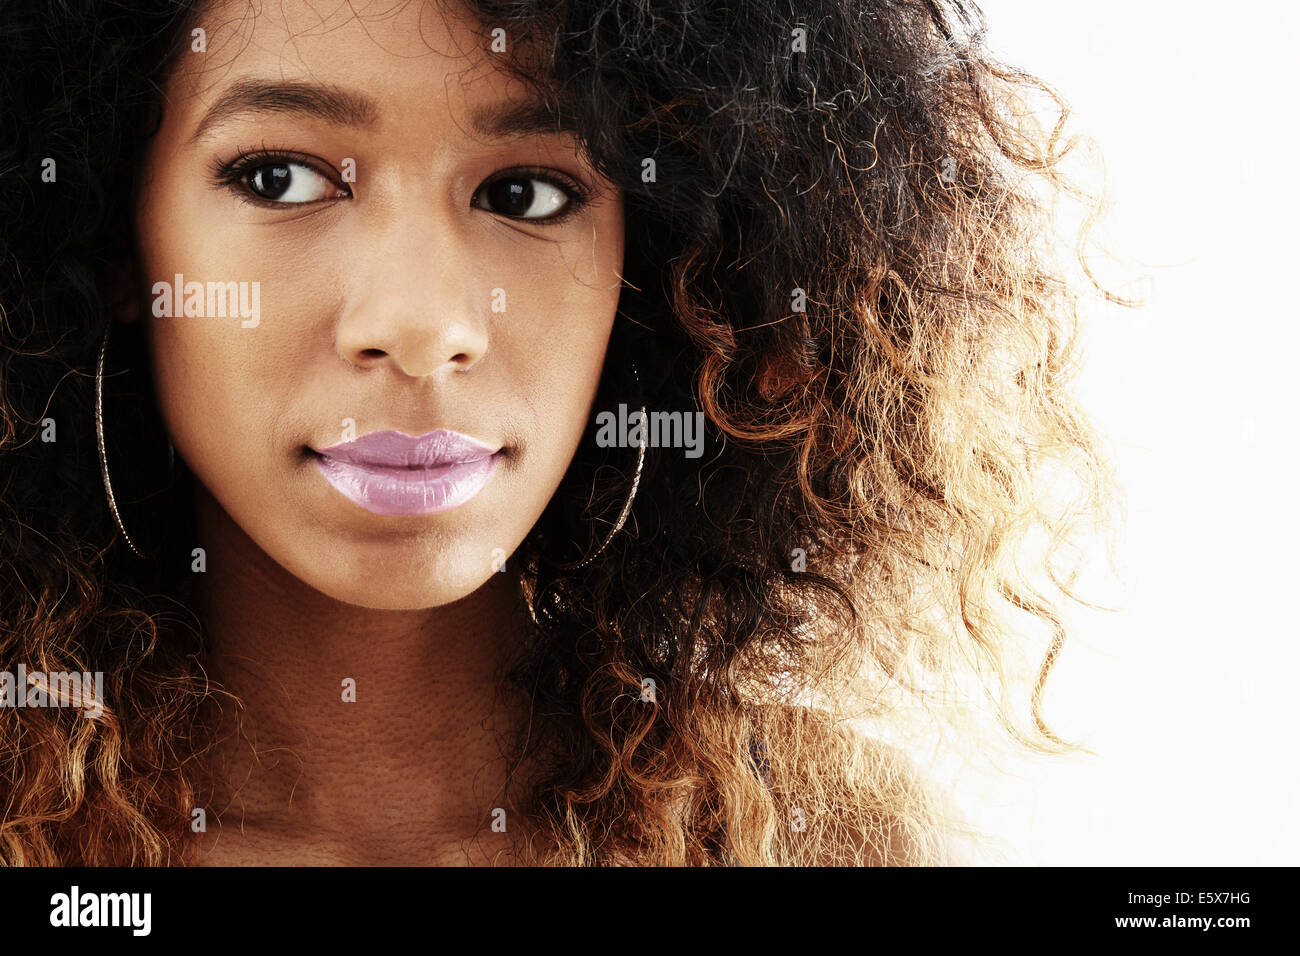 Close up studio portrait of young woman glancing sideways Stock Photo